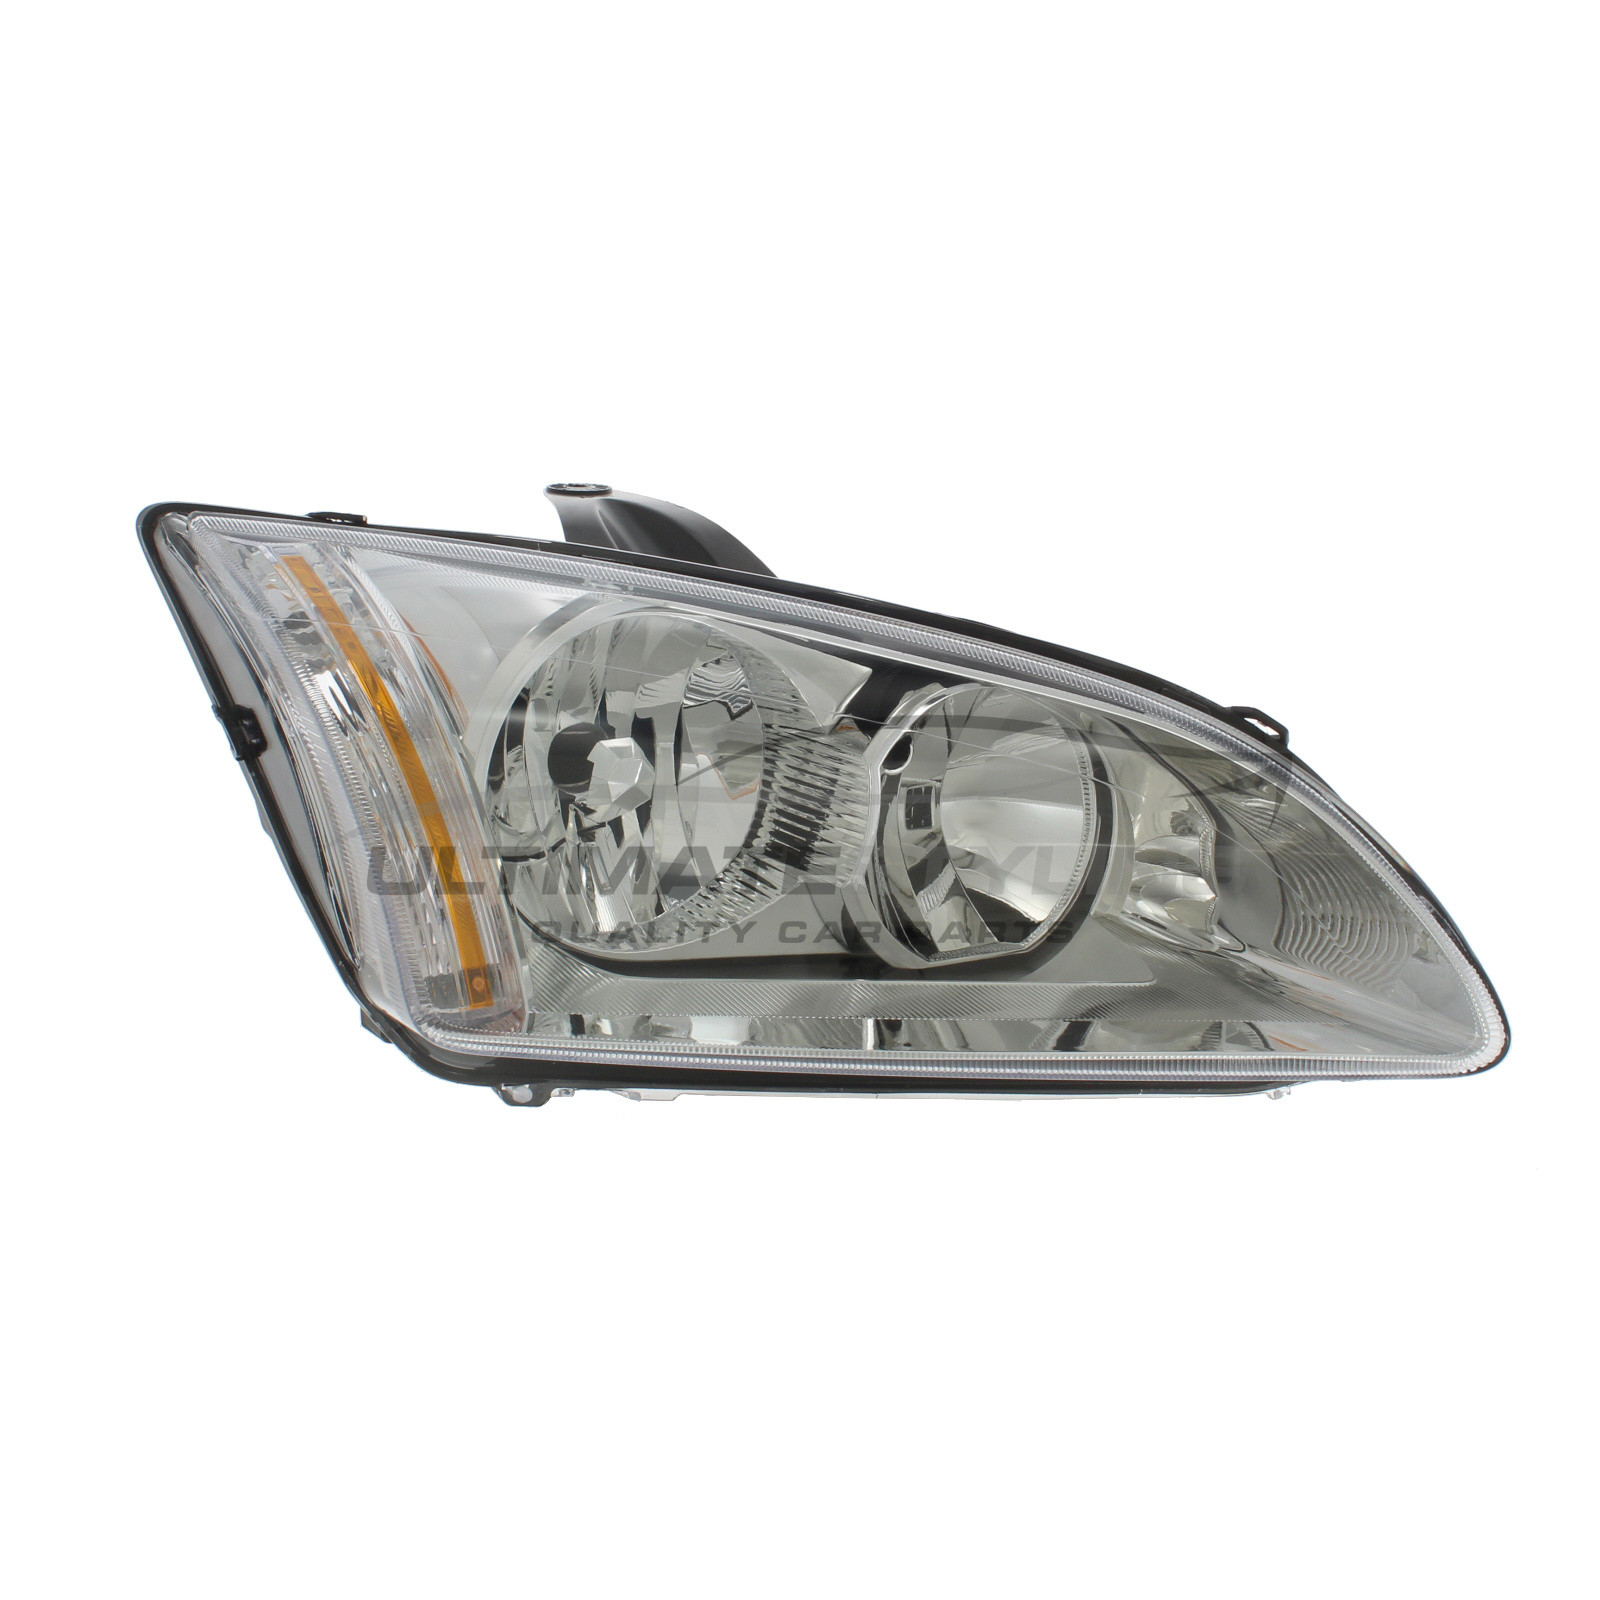 Ford Focus 2005-2008 Halogen, Electric Without Motor, Chrome Headlight / Headlamp Drivers Side (RH)